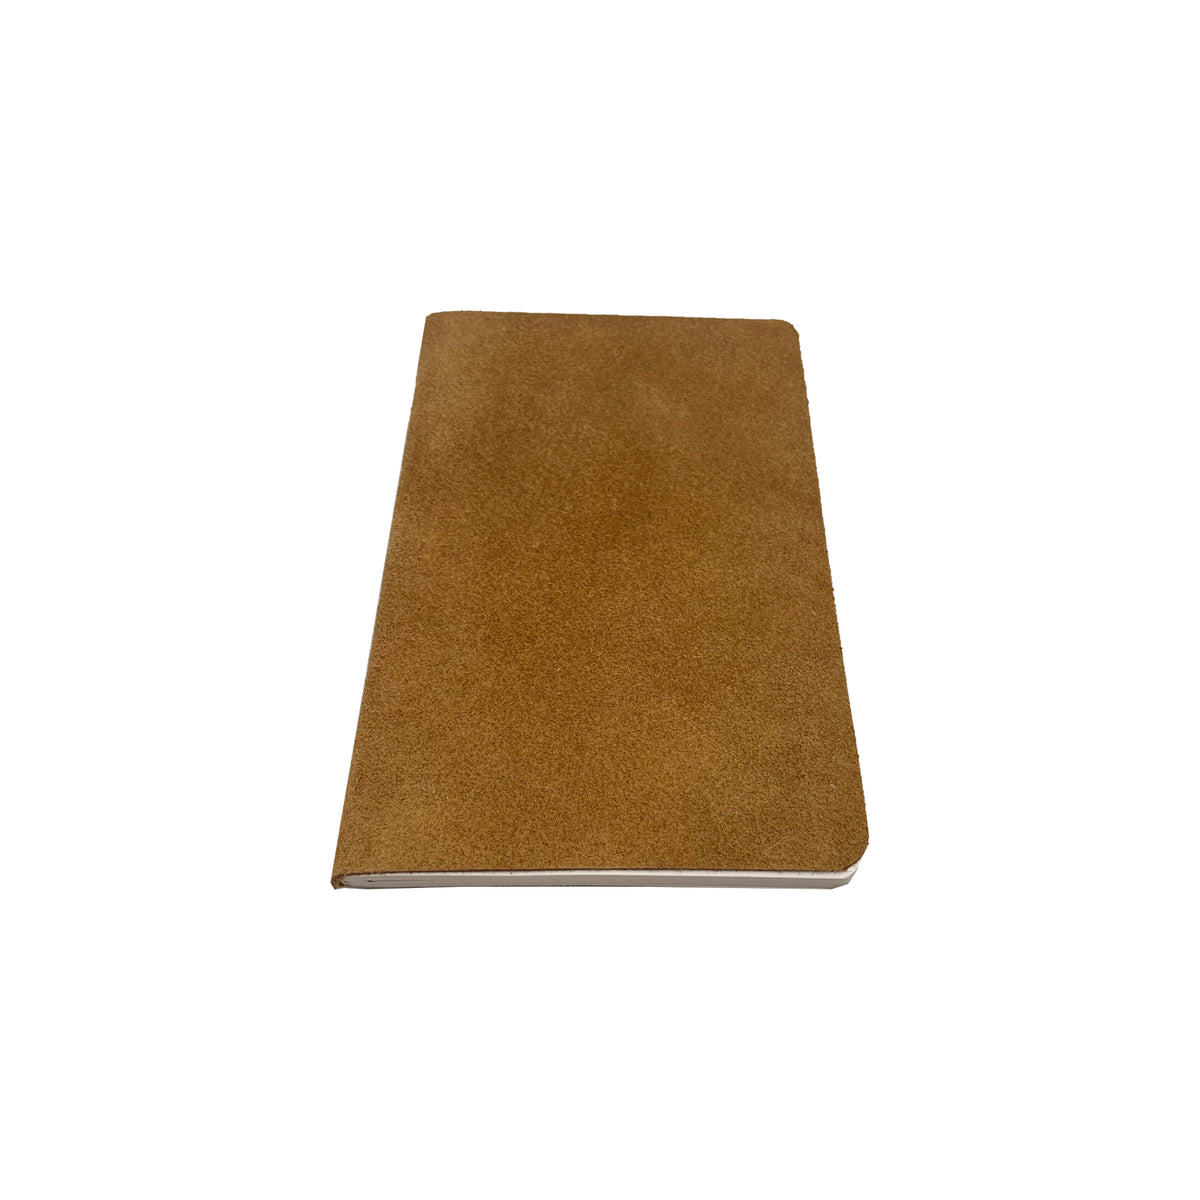 Joaquin Leather Writing Journal - Golden Suede - Notbrand